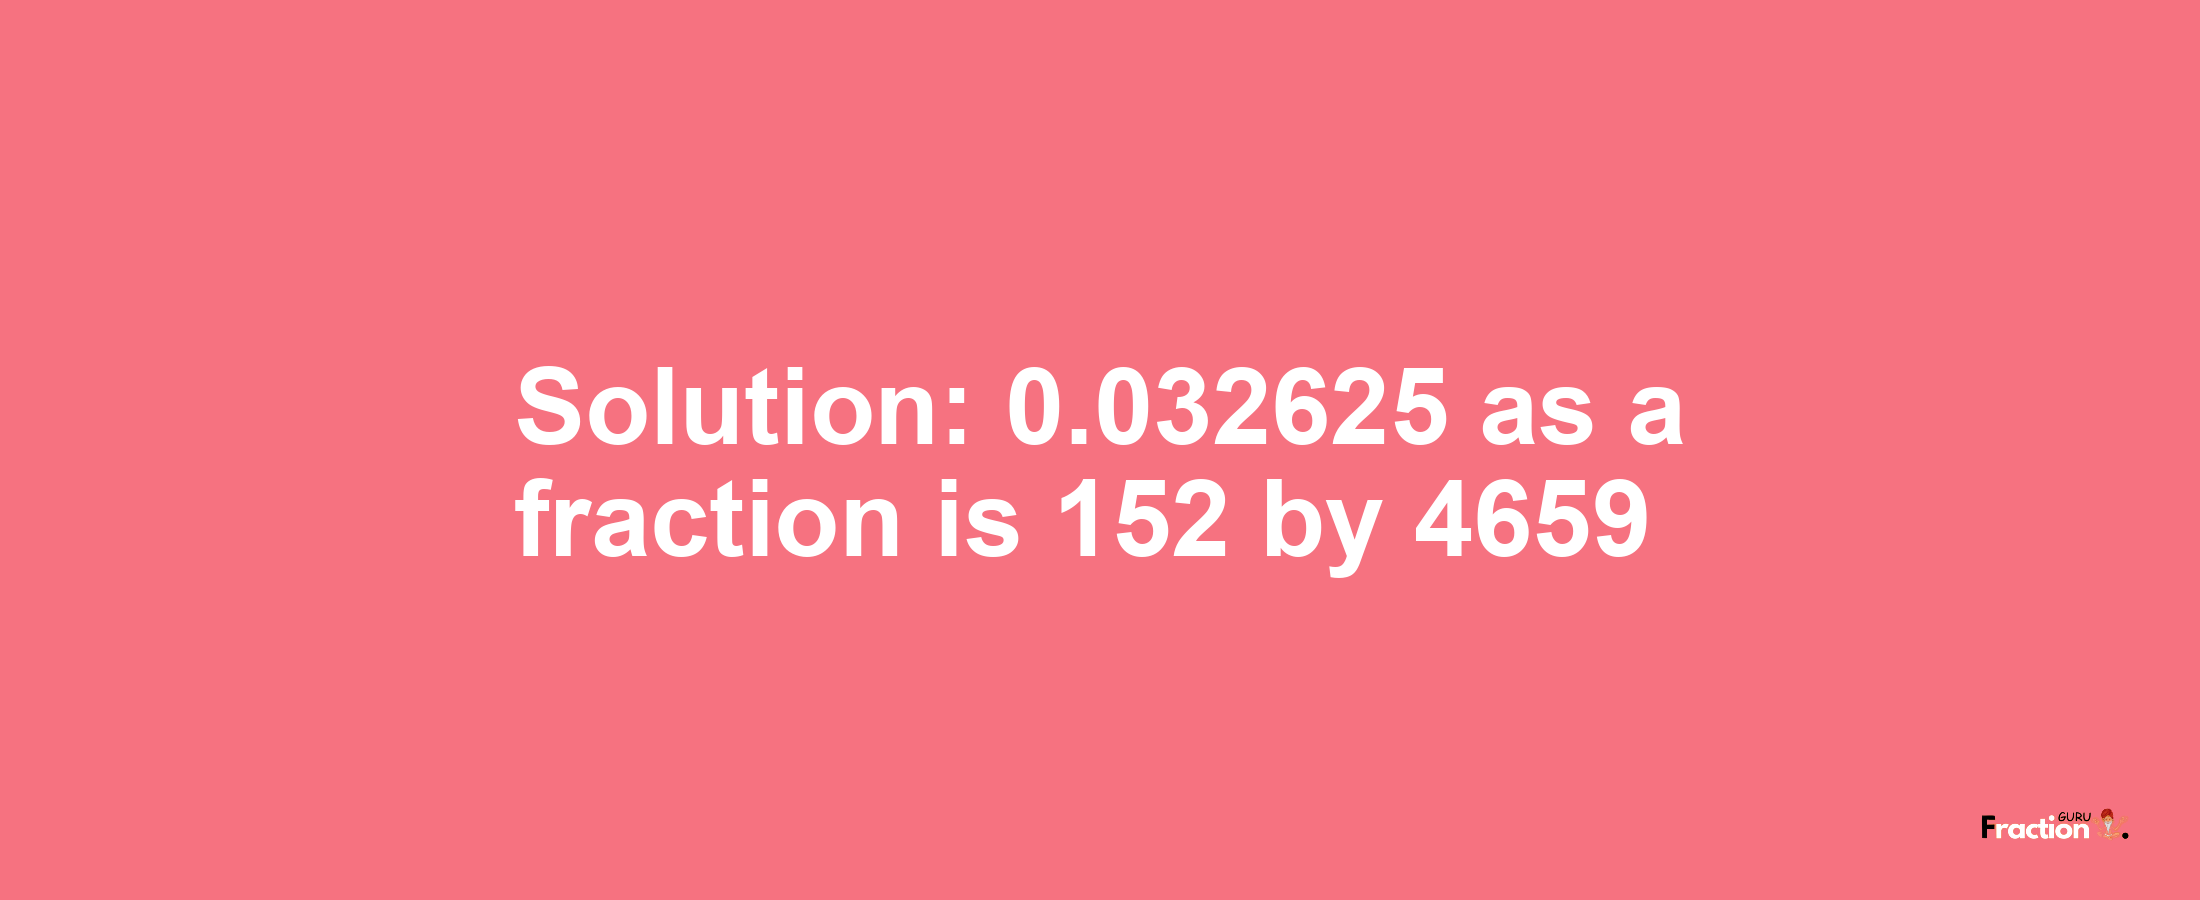 Solution:0.032625 as a fraction is 152/4659